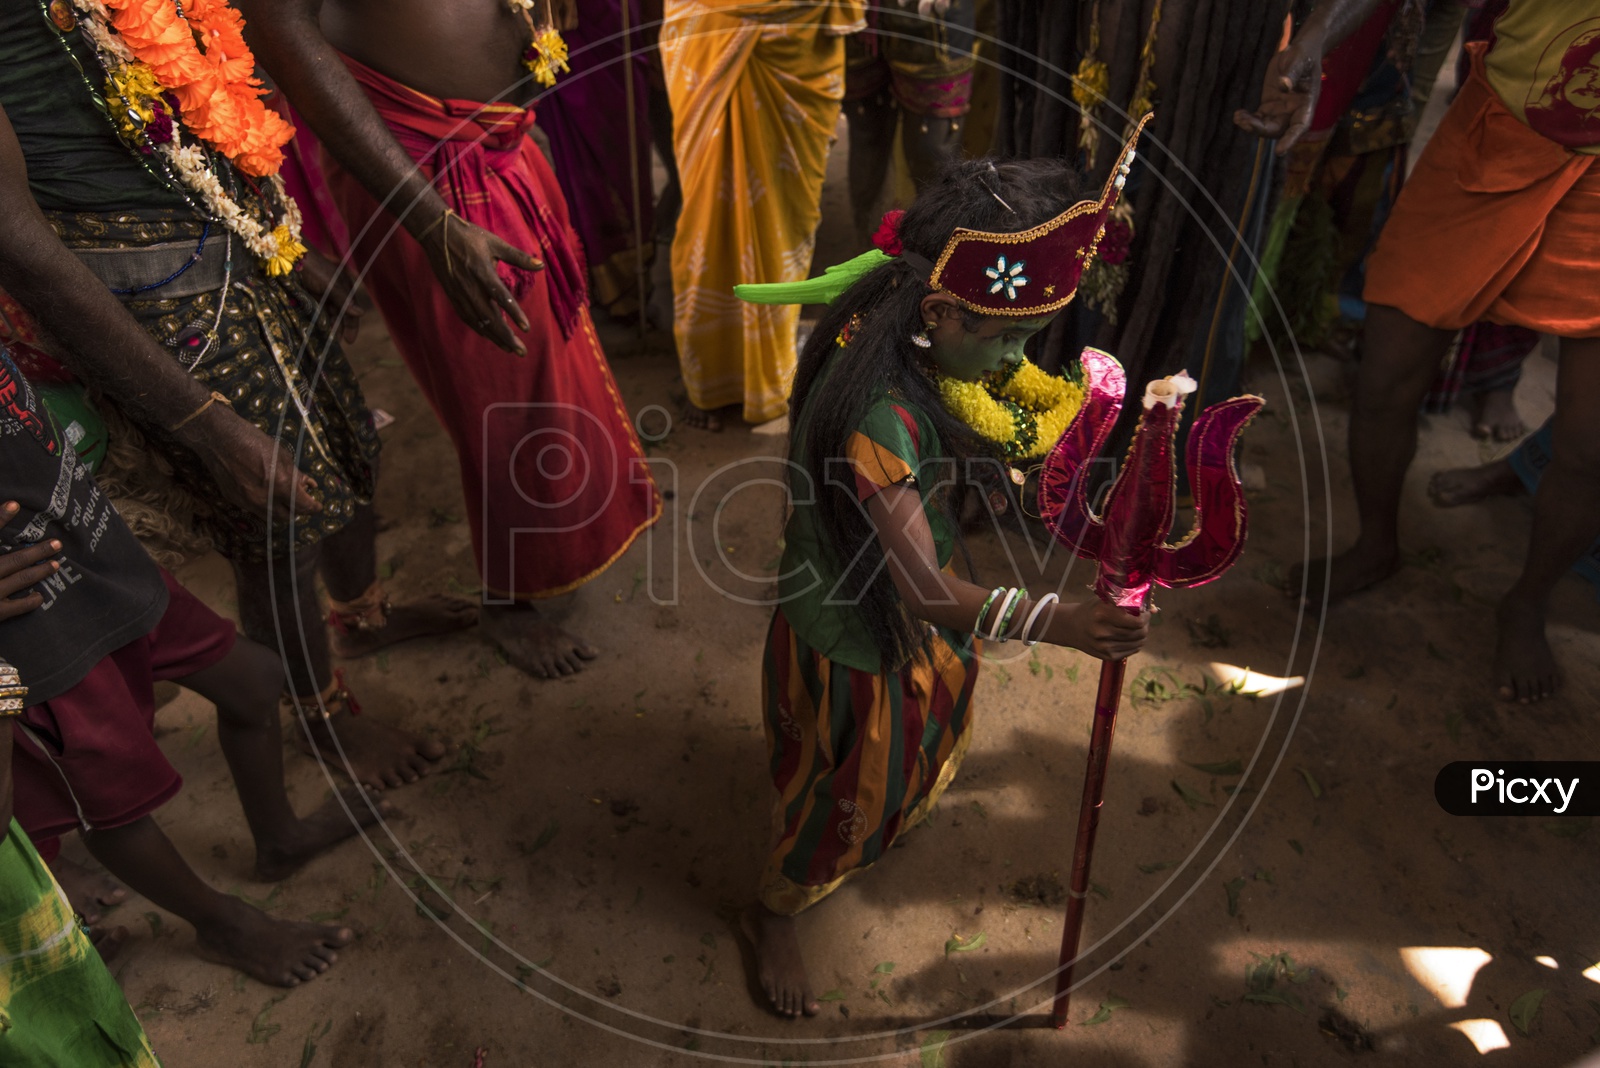 A Small Child in a Getup For Dussera Celebrations in tamil Nadu